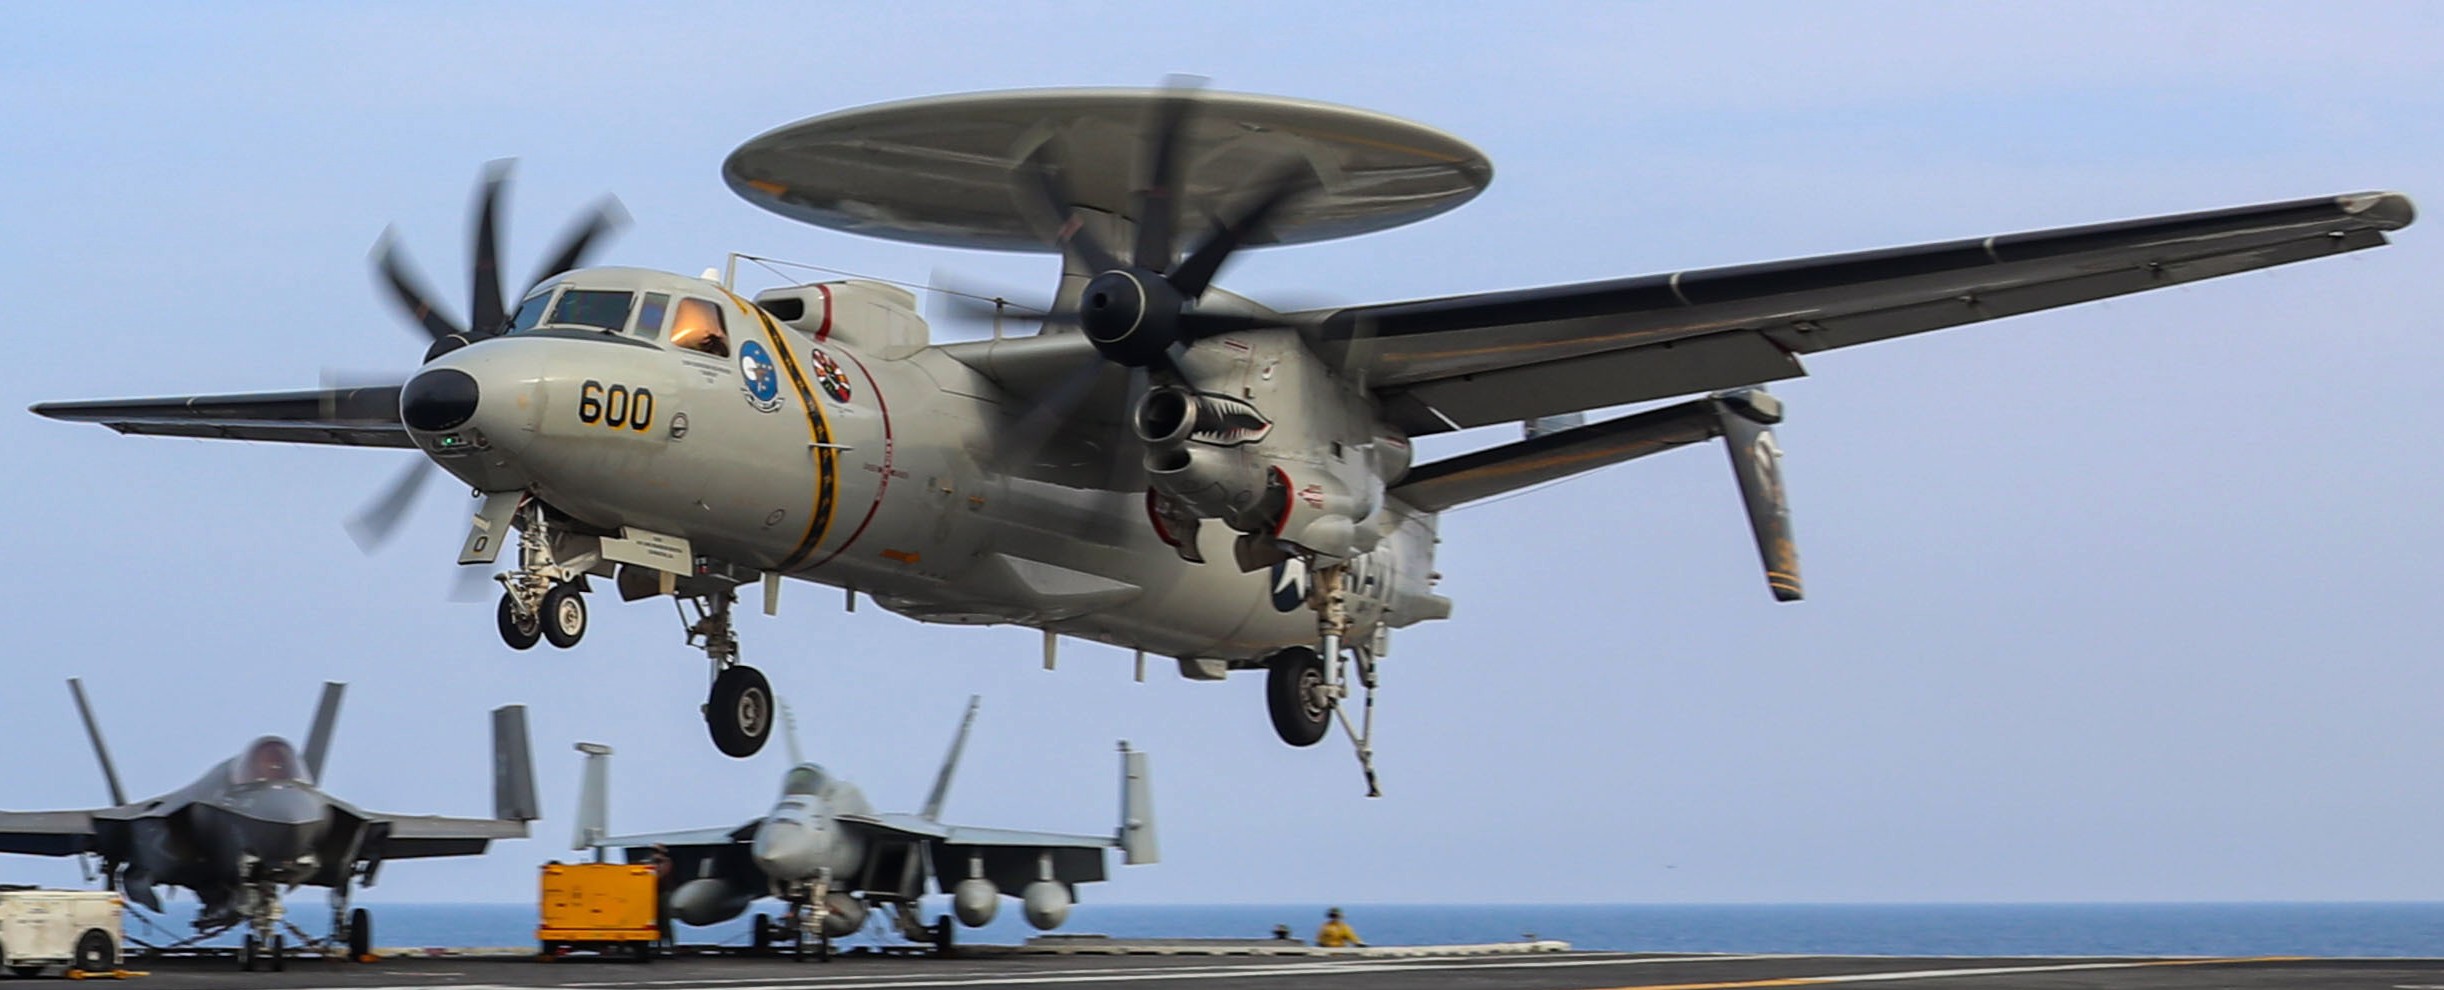 vaw-117 wallbangers airborne command and control squadron navy e-2d hawkeye cvw-9 uss abraham lincoln cvn-72 25